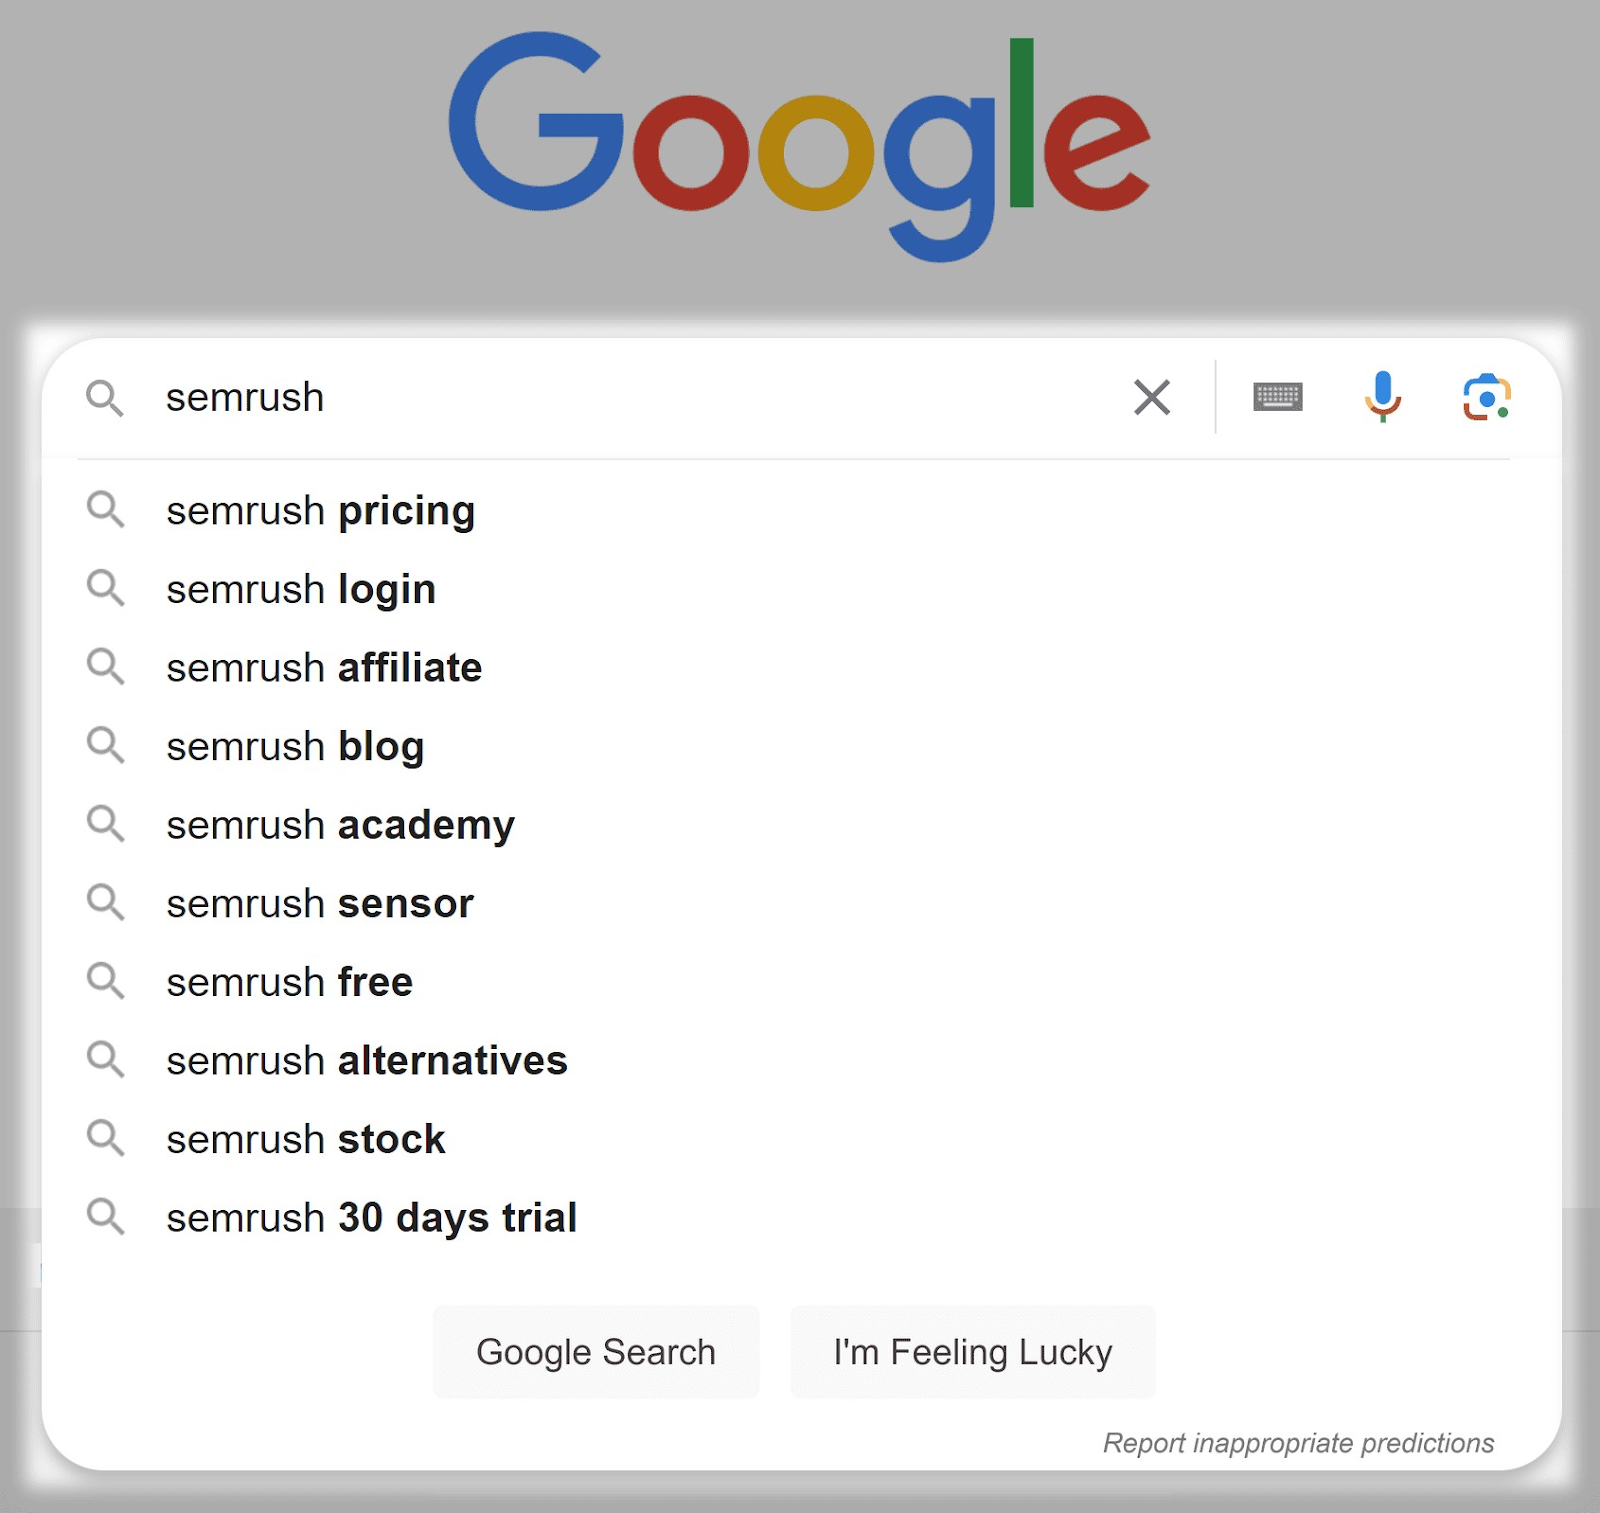 Google autocomplete suggestions when typing “semrush” into the search bar